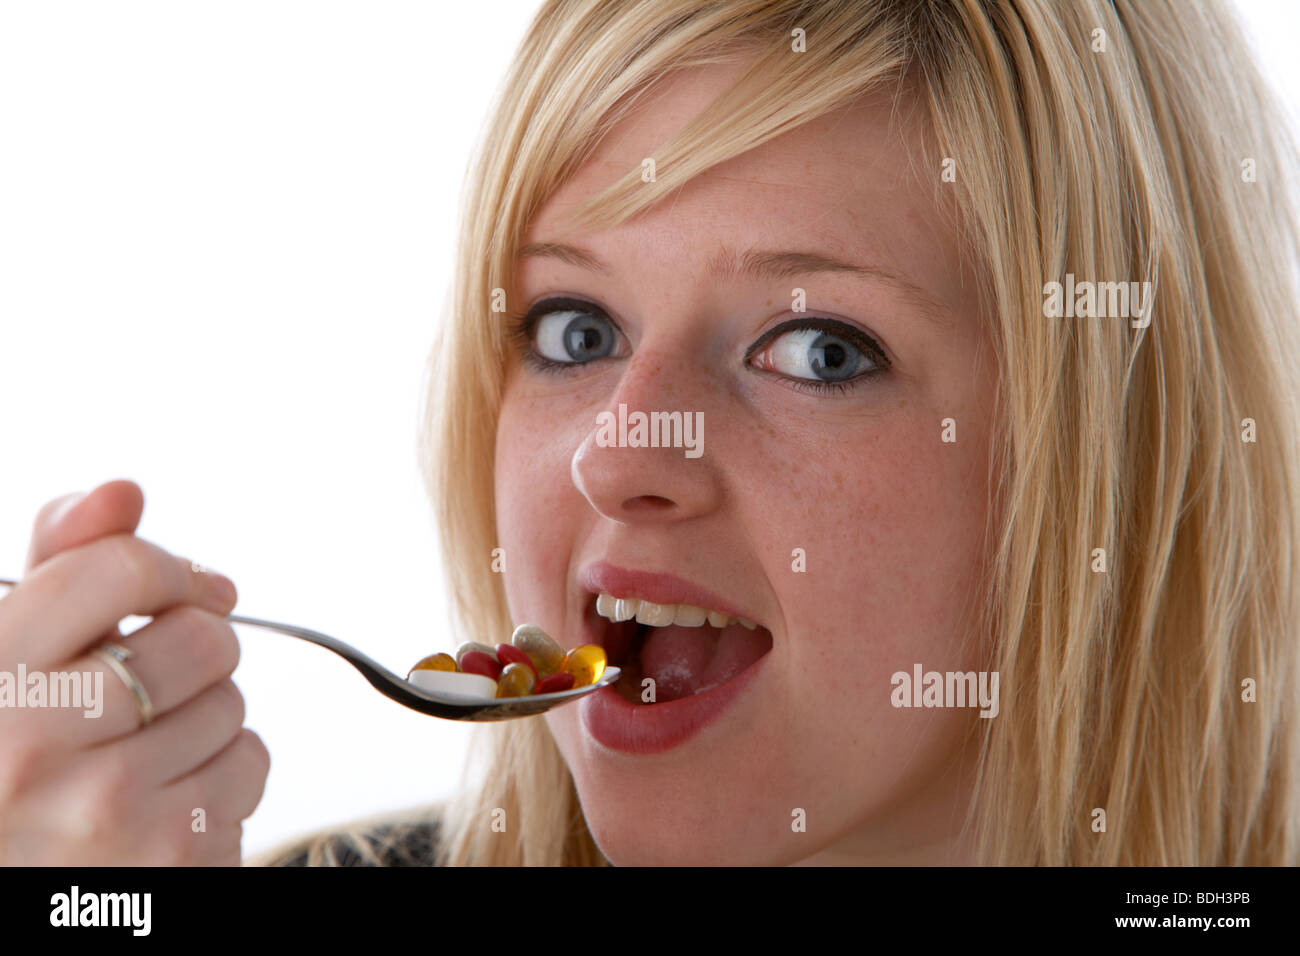 young 20 year old blonde woman taking a spoonful of vitamin supplements Stock Photo